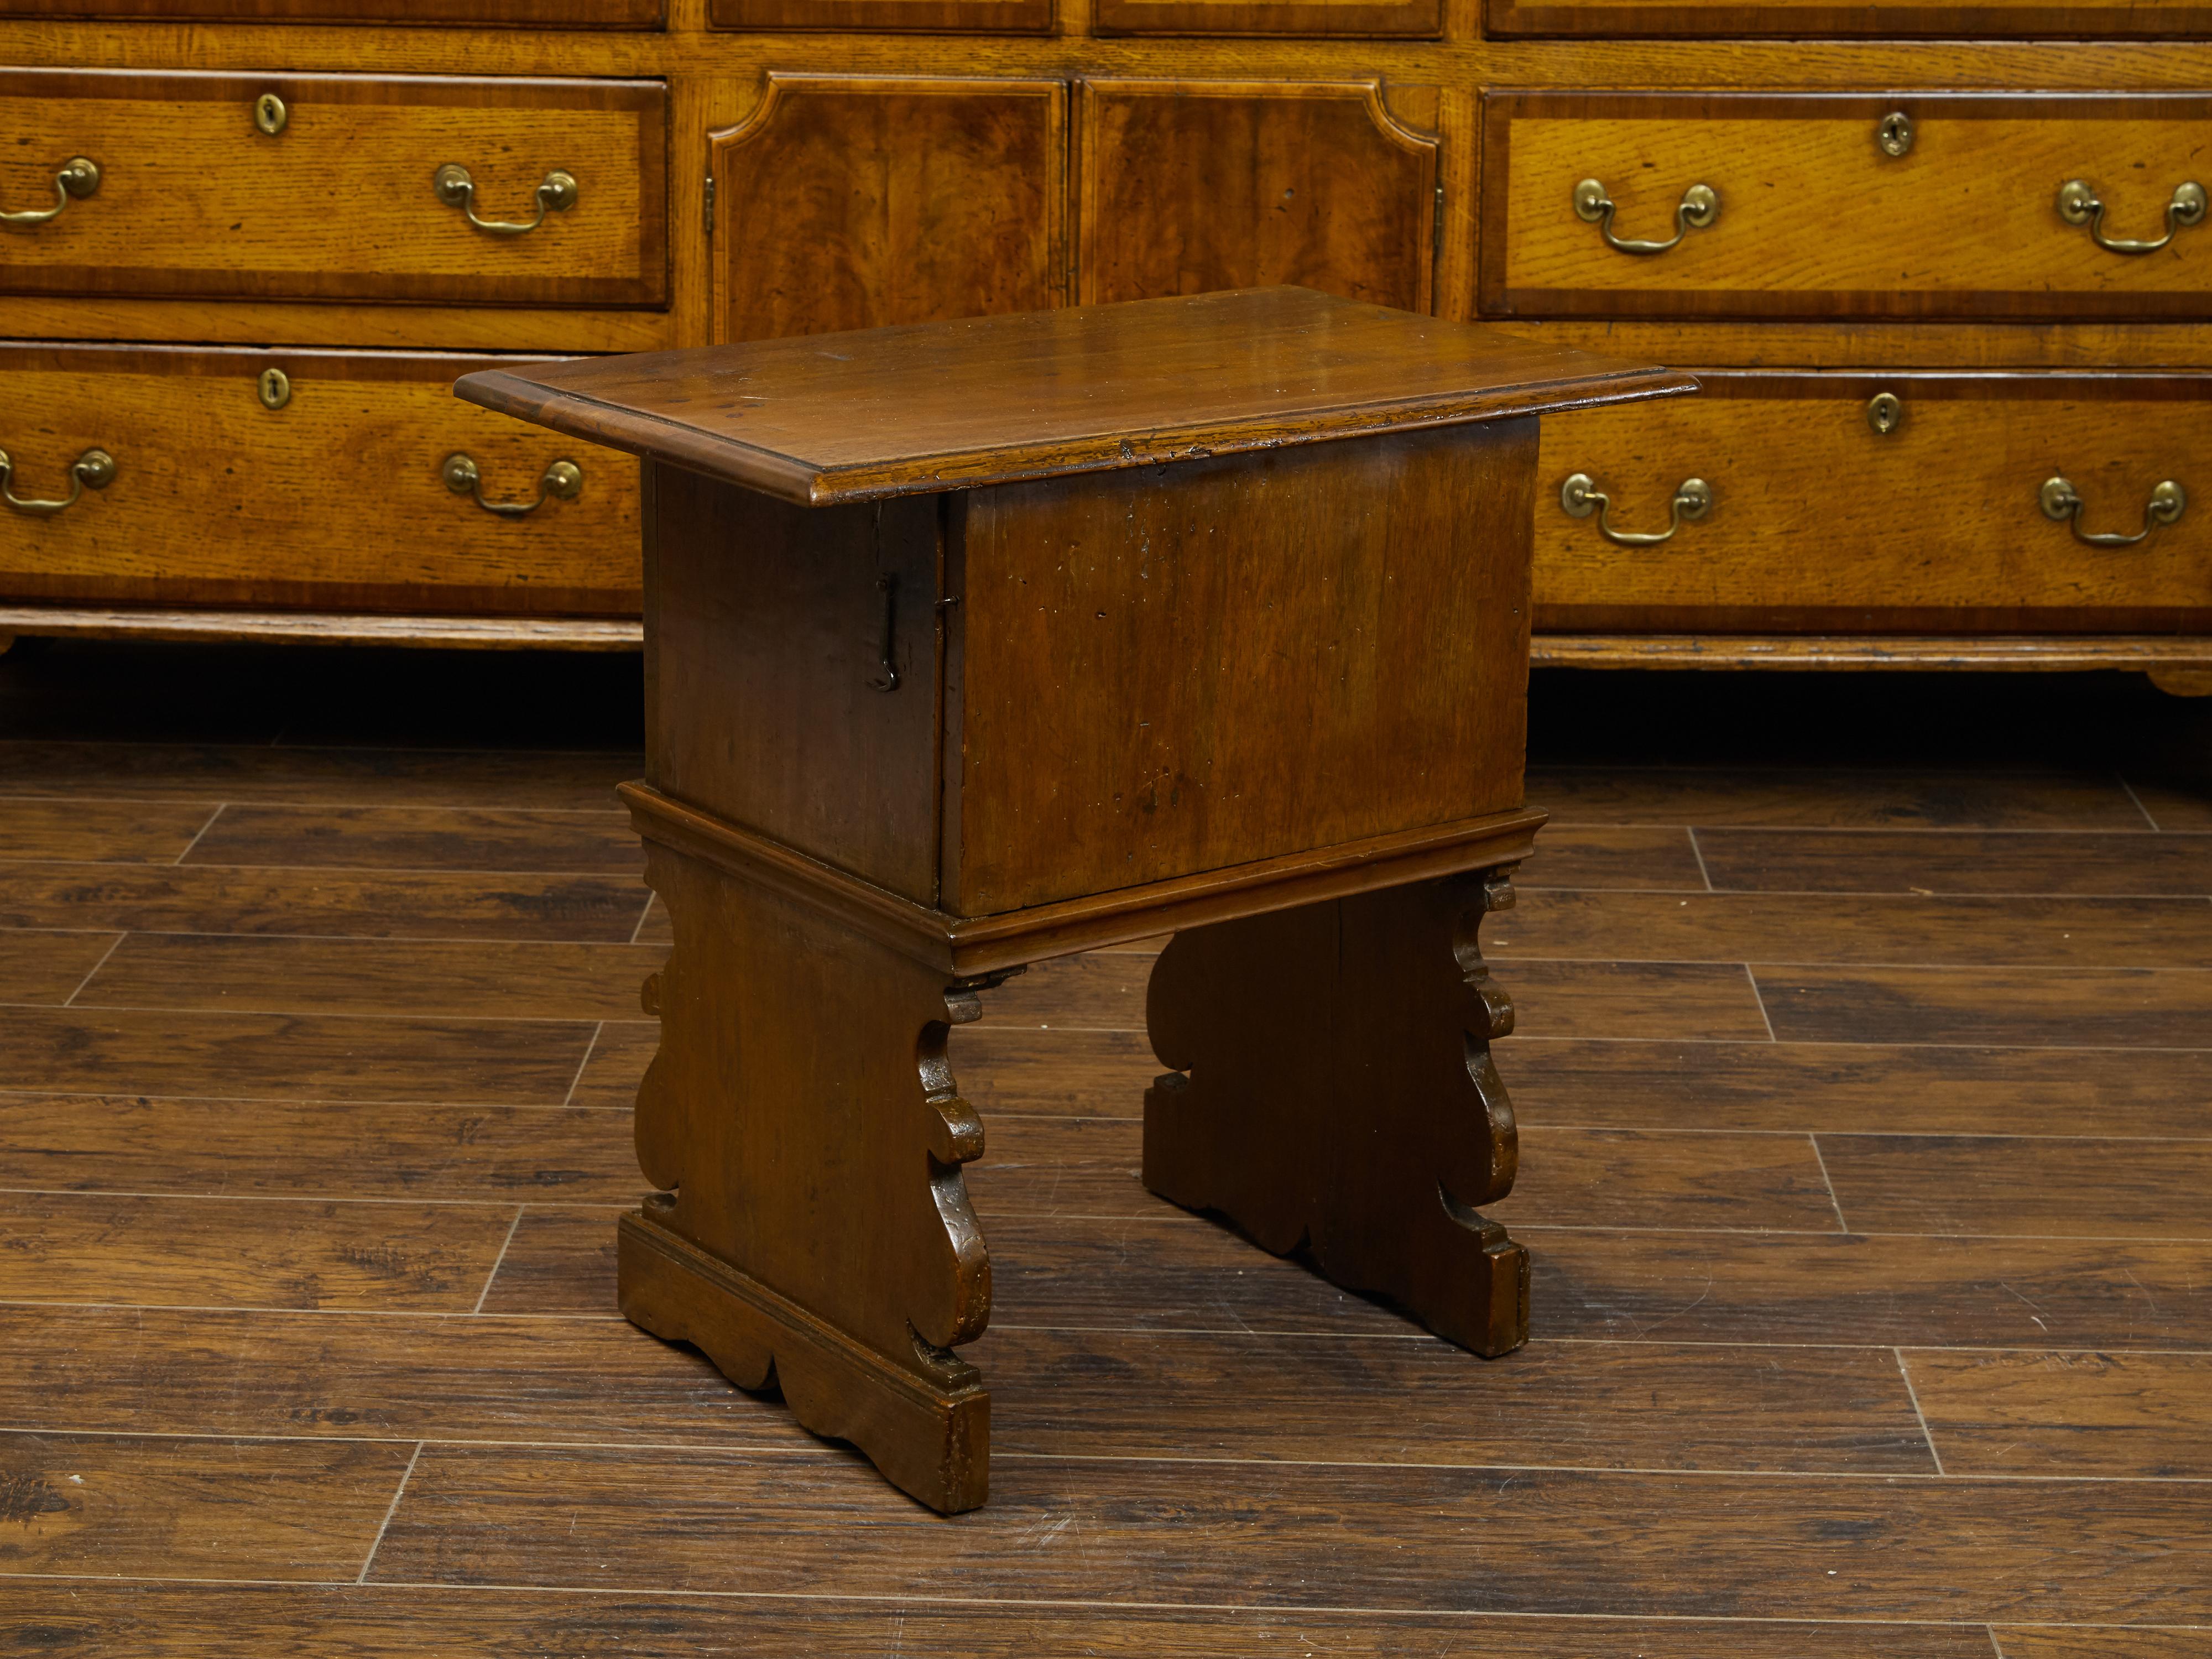 An Italian walnut side table from the 19th century, with single door and carved base. Created in Italy during the 19th century, this walnut side table features a rectangular top with beveled edges, overhanging a single door opening thanks to a